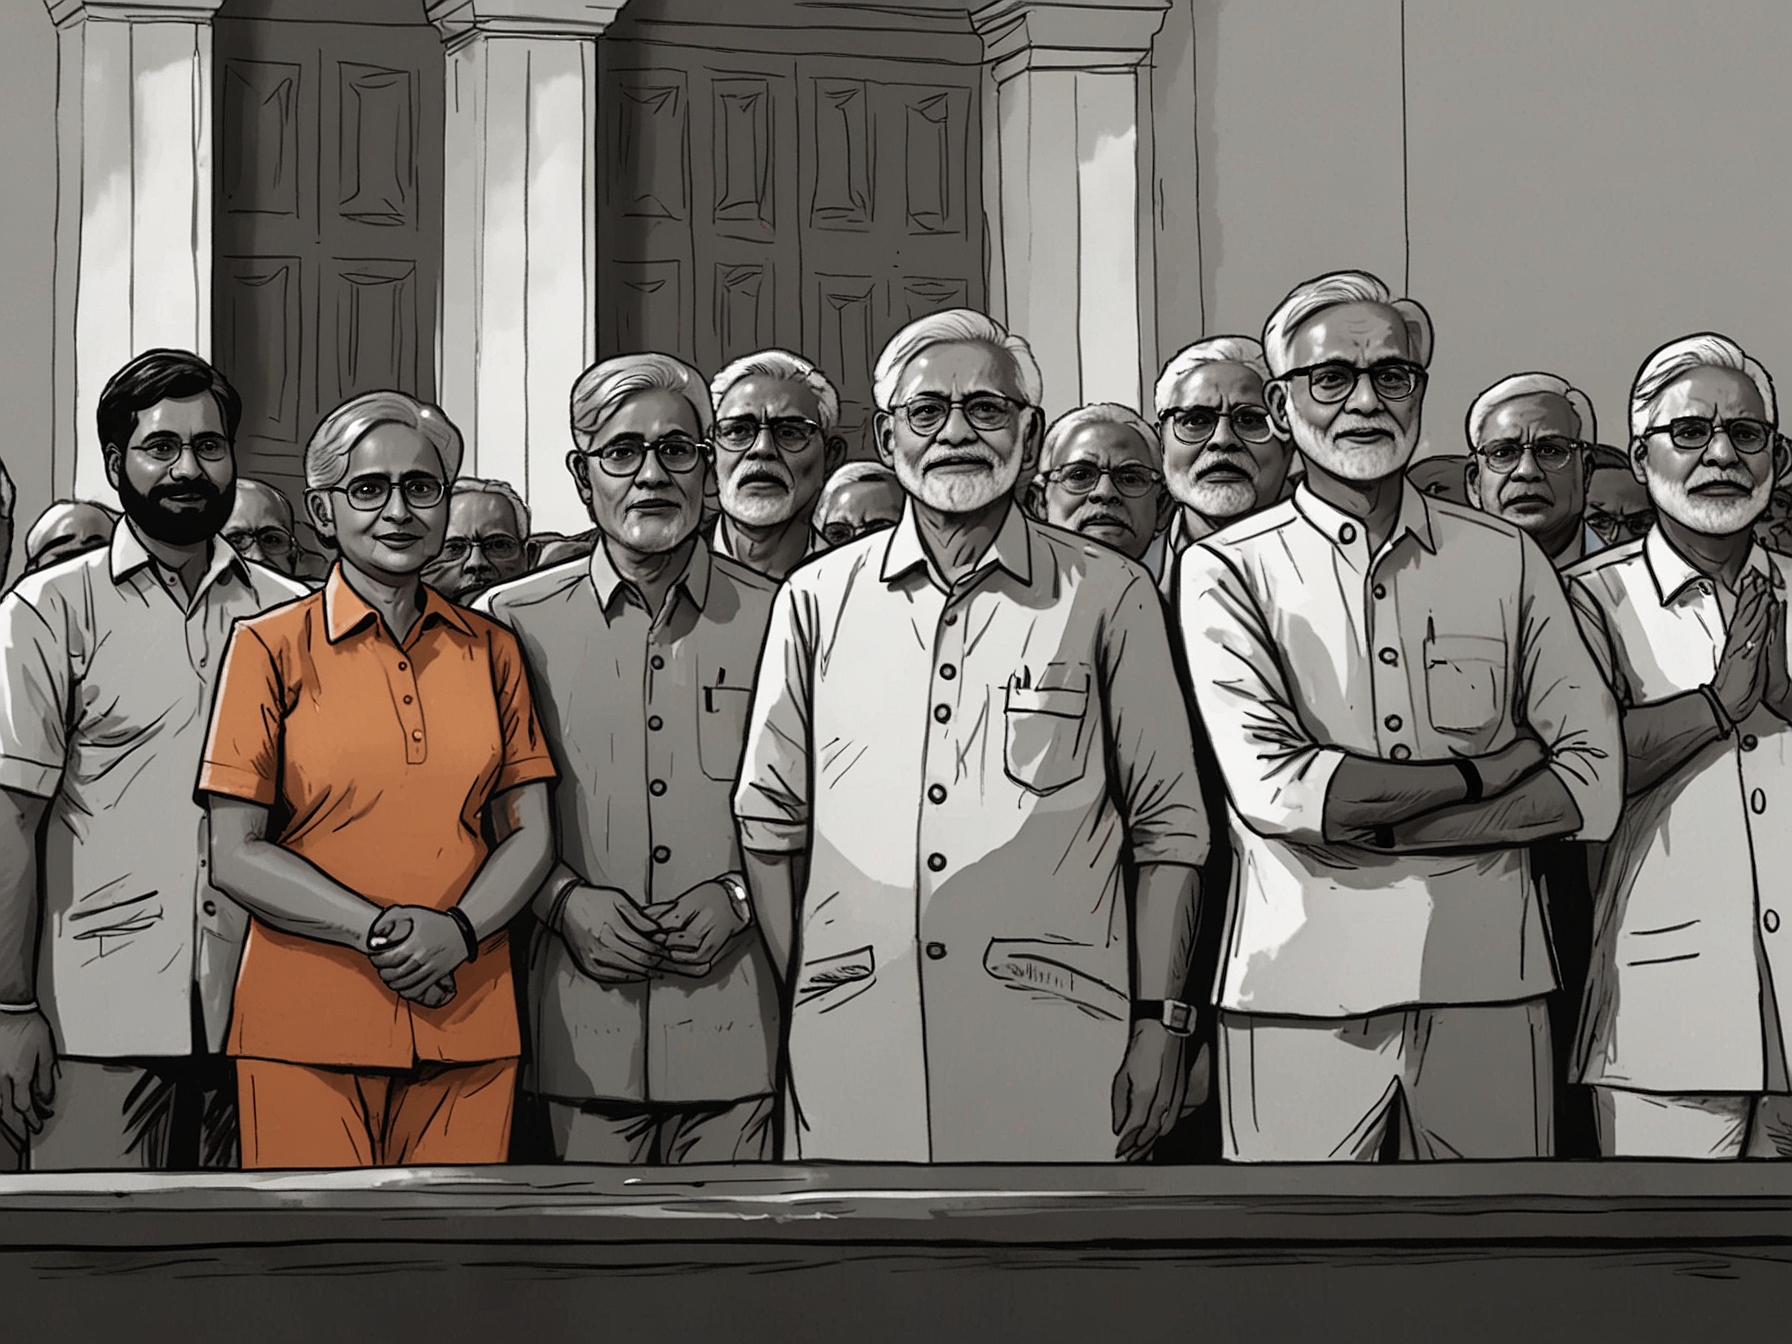 A group of INDIA bloc MPs standing together in protest, highlighting their decision to boycott the pro tem Speaker's assistance during the Lok Sabha oath-taking ceremony due to perceived injustices.